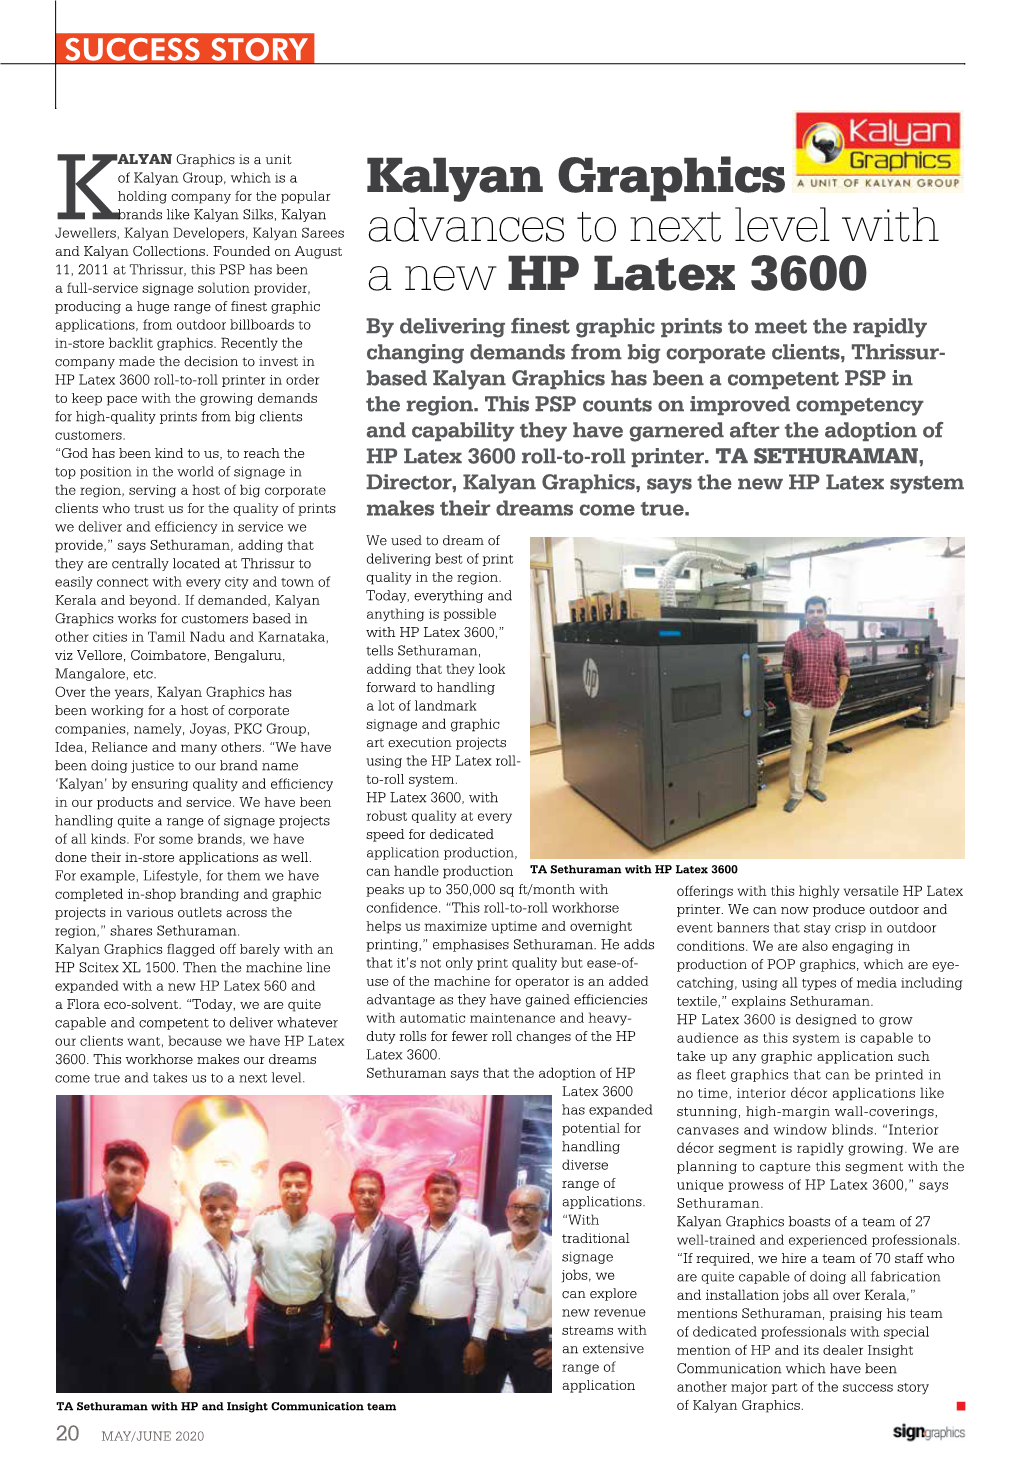 Kalyan Graphics Advances to Next Level with a New HP Latex 3600